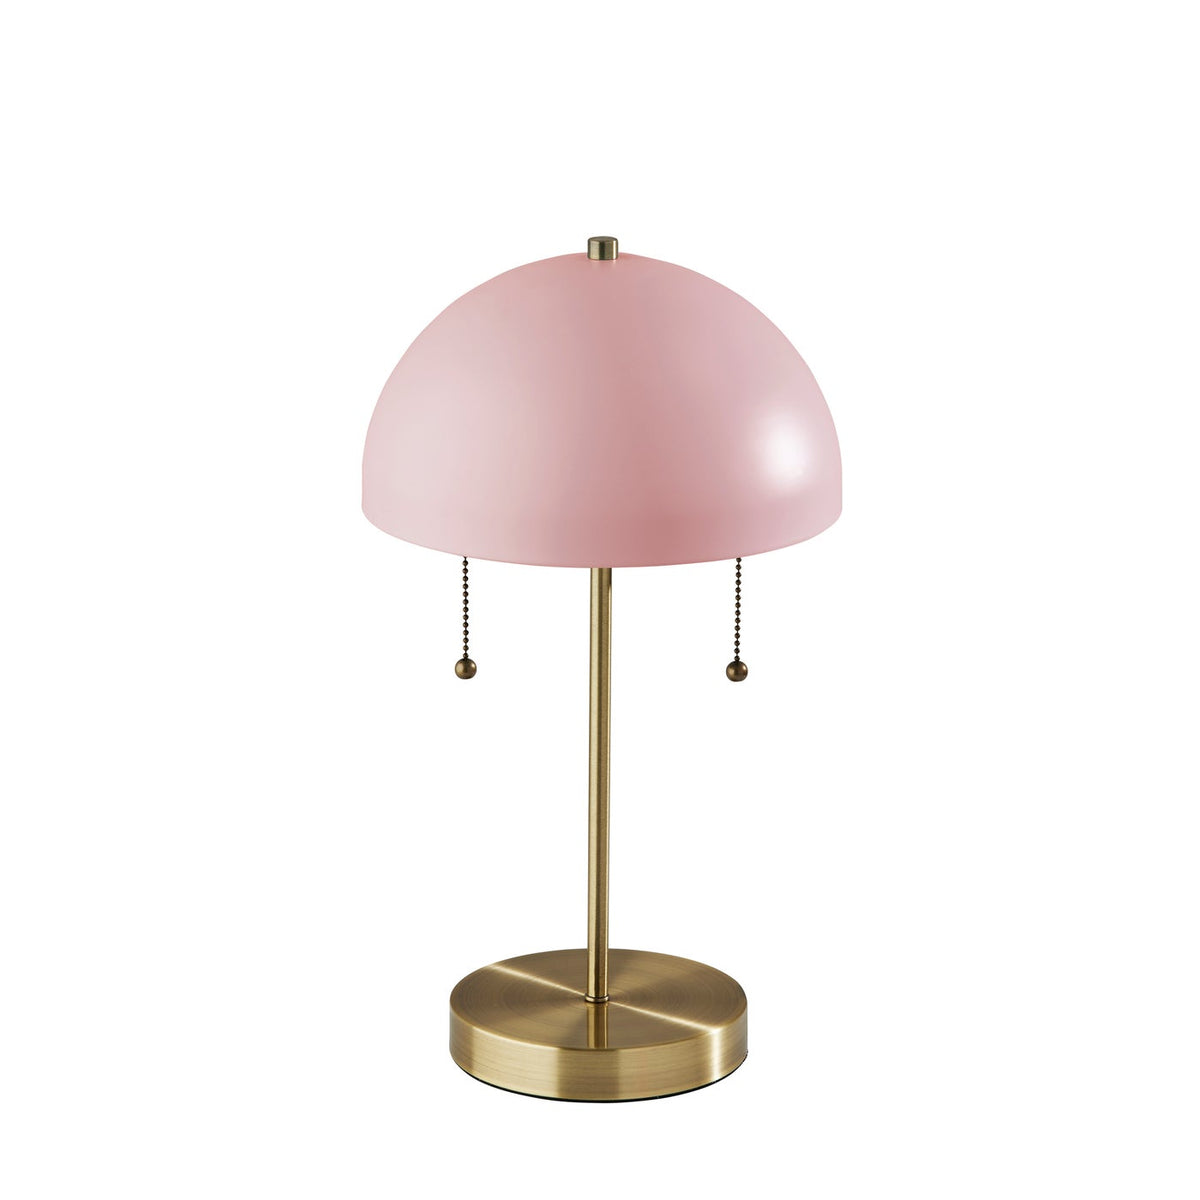 Adesso Home - 5132-29 - Two Light Table Lamp - Bowie - Antique Brass & Light Pink